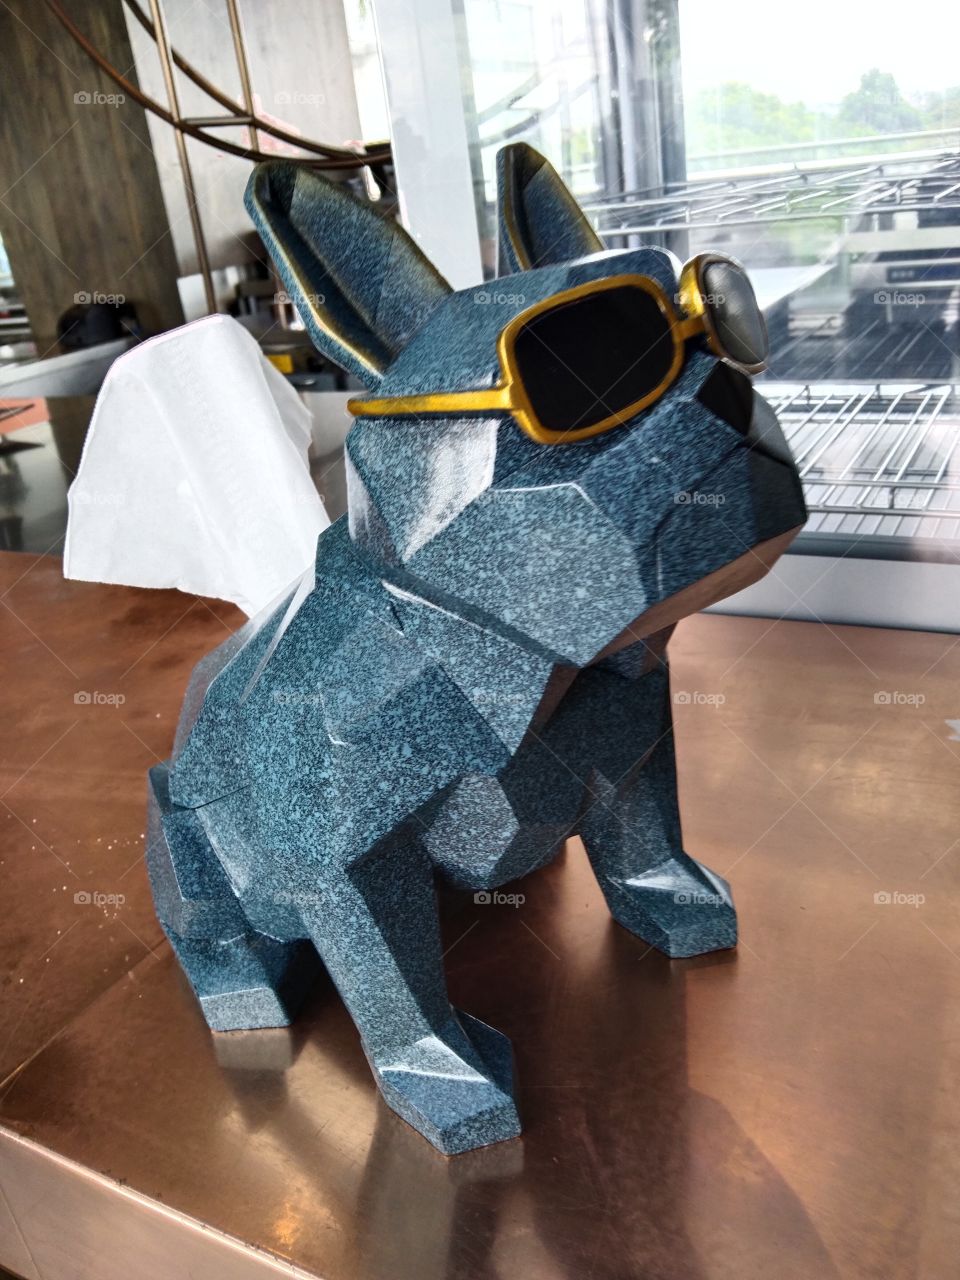 dog sculpture holds tissues